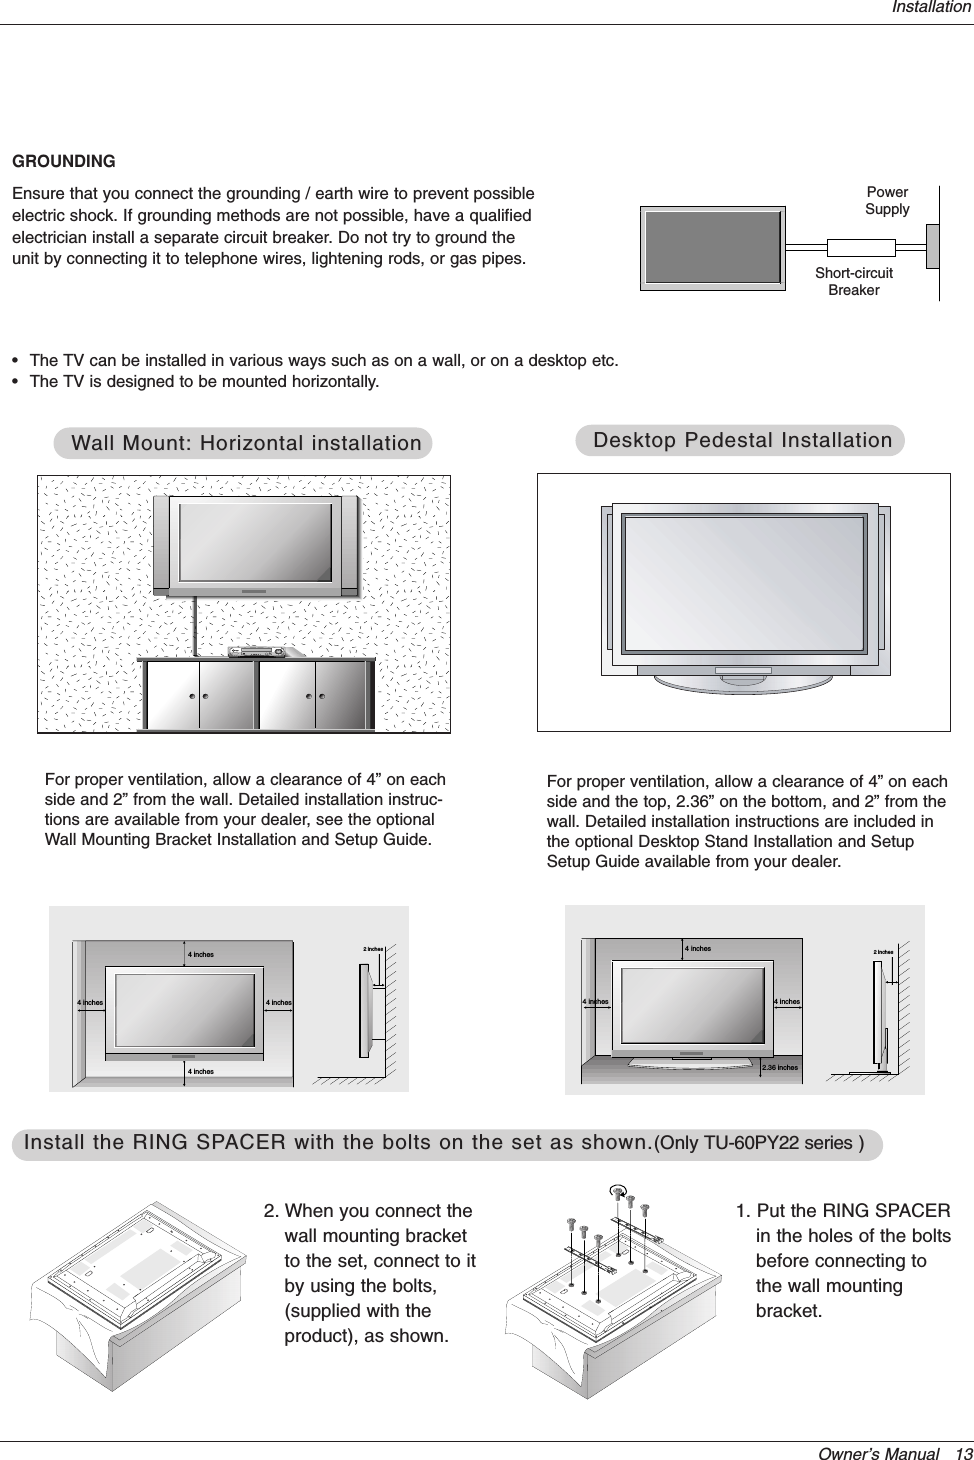 Owner’s Manual   13Installation•The TV can be installed in various ways such as on a wall, or on a desktop etc.•The TV is designed to be mounted horizontally. GROUNDINGEnsure that you connect the grounding / earth wire to prevent possibleelectric shock. If grounding methods are not possible, have a qualifiedelectrician install a separate circuit breaker. Do not try to ground theunit by connecting it to telephone wires, lightening rods, or gas pipes.PowerSupplyShort-circuitBreaker4 inches4 inches4 inches4 inches2 inchesWWall Mount: Horizontal installationall Mount: Horizontal installationFor proper ventilation, allow a clearance of 4” on eachside and 2” from the wall. Detailed installation instruc-tions are available from your dealer, see the optionalWall Mounting Bracket Installation and Setup Guide.4 inches4 inches2.36 inches4 inches2 inchesDesktop Pedestal InstallationDesktop Pedestal InstallationFor proper ventilation, allow a clearance of 4” on eachside and the top, 2.36” on the bottom, and 2” from thewall. Detailed installation instructions are included inthe optional Desktop Stand Installation and SetupSetup Guide available from your dealer.1. Put the RING SPACERin the holes of the boltsbefore connecting tothe wall mountingbracket.2. When you connect thewall mounting bracketto the set, connect to itby using the bolts,(supplied with theproduct), as shown.Install the RING SPInstall the RING SPACER with the bolts on the set as shown.ACER with the bolts on the set as shown.(Only TU-60PY22 series )